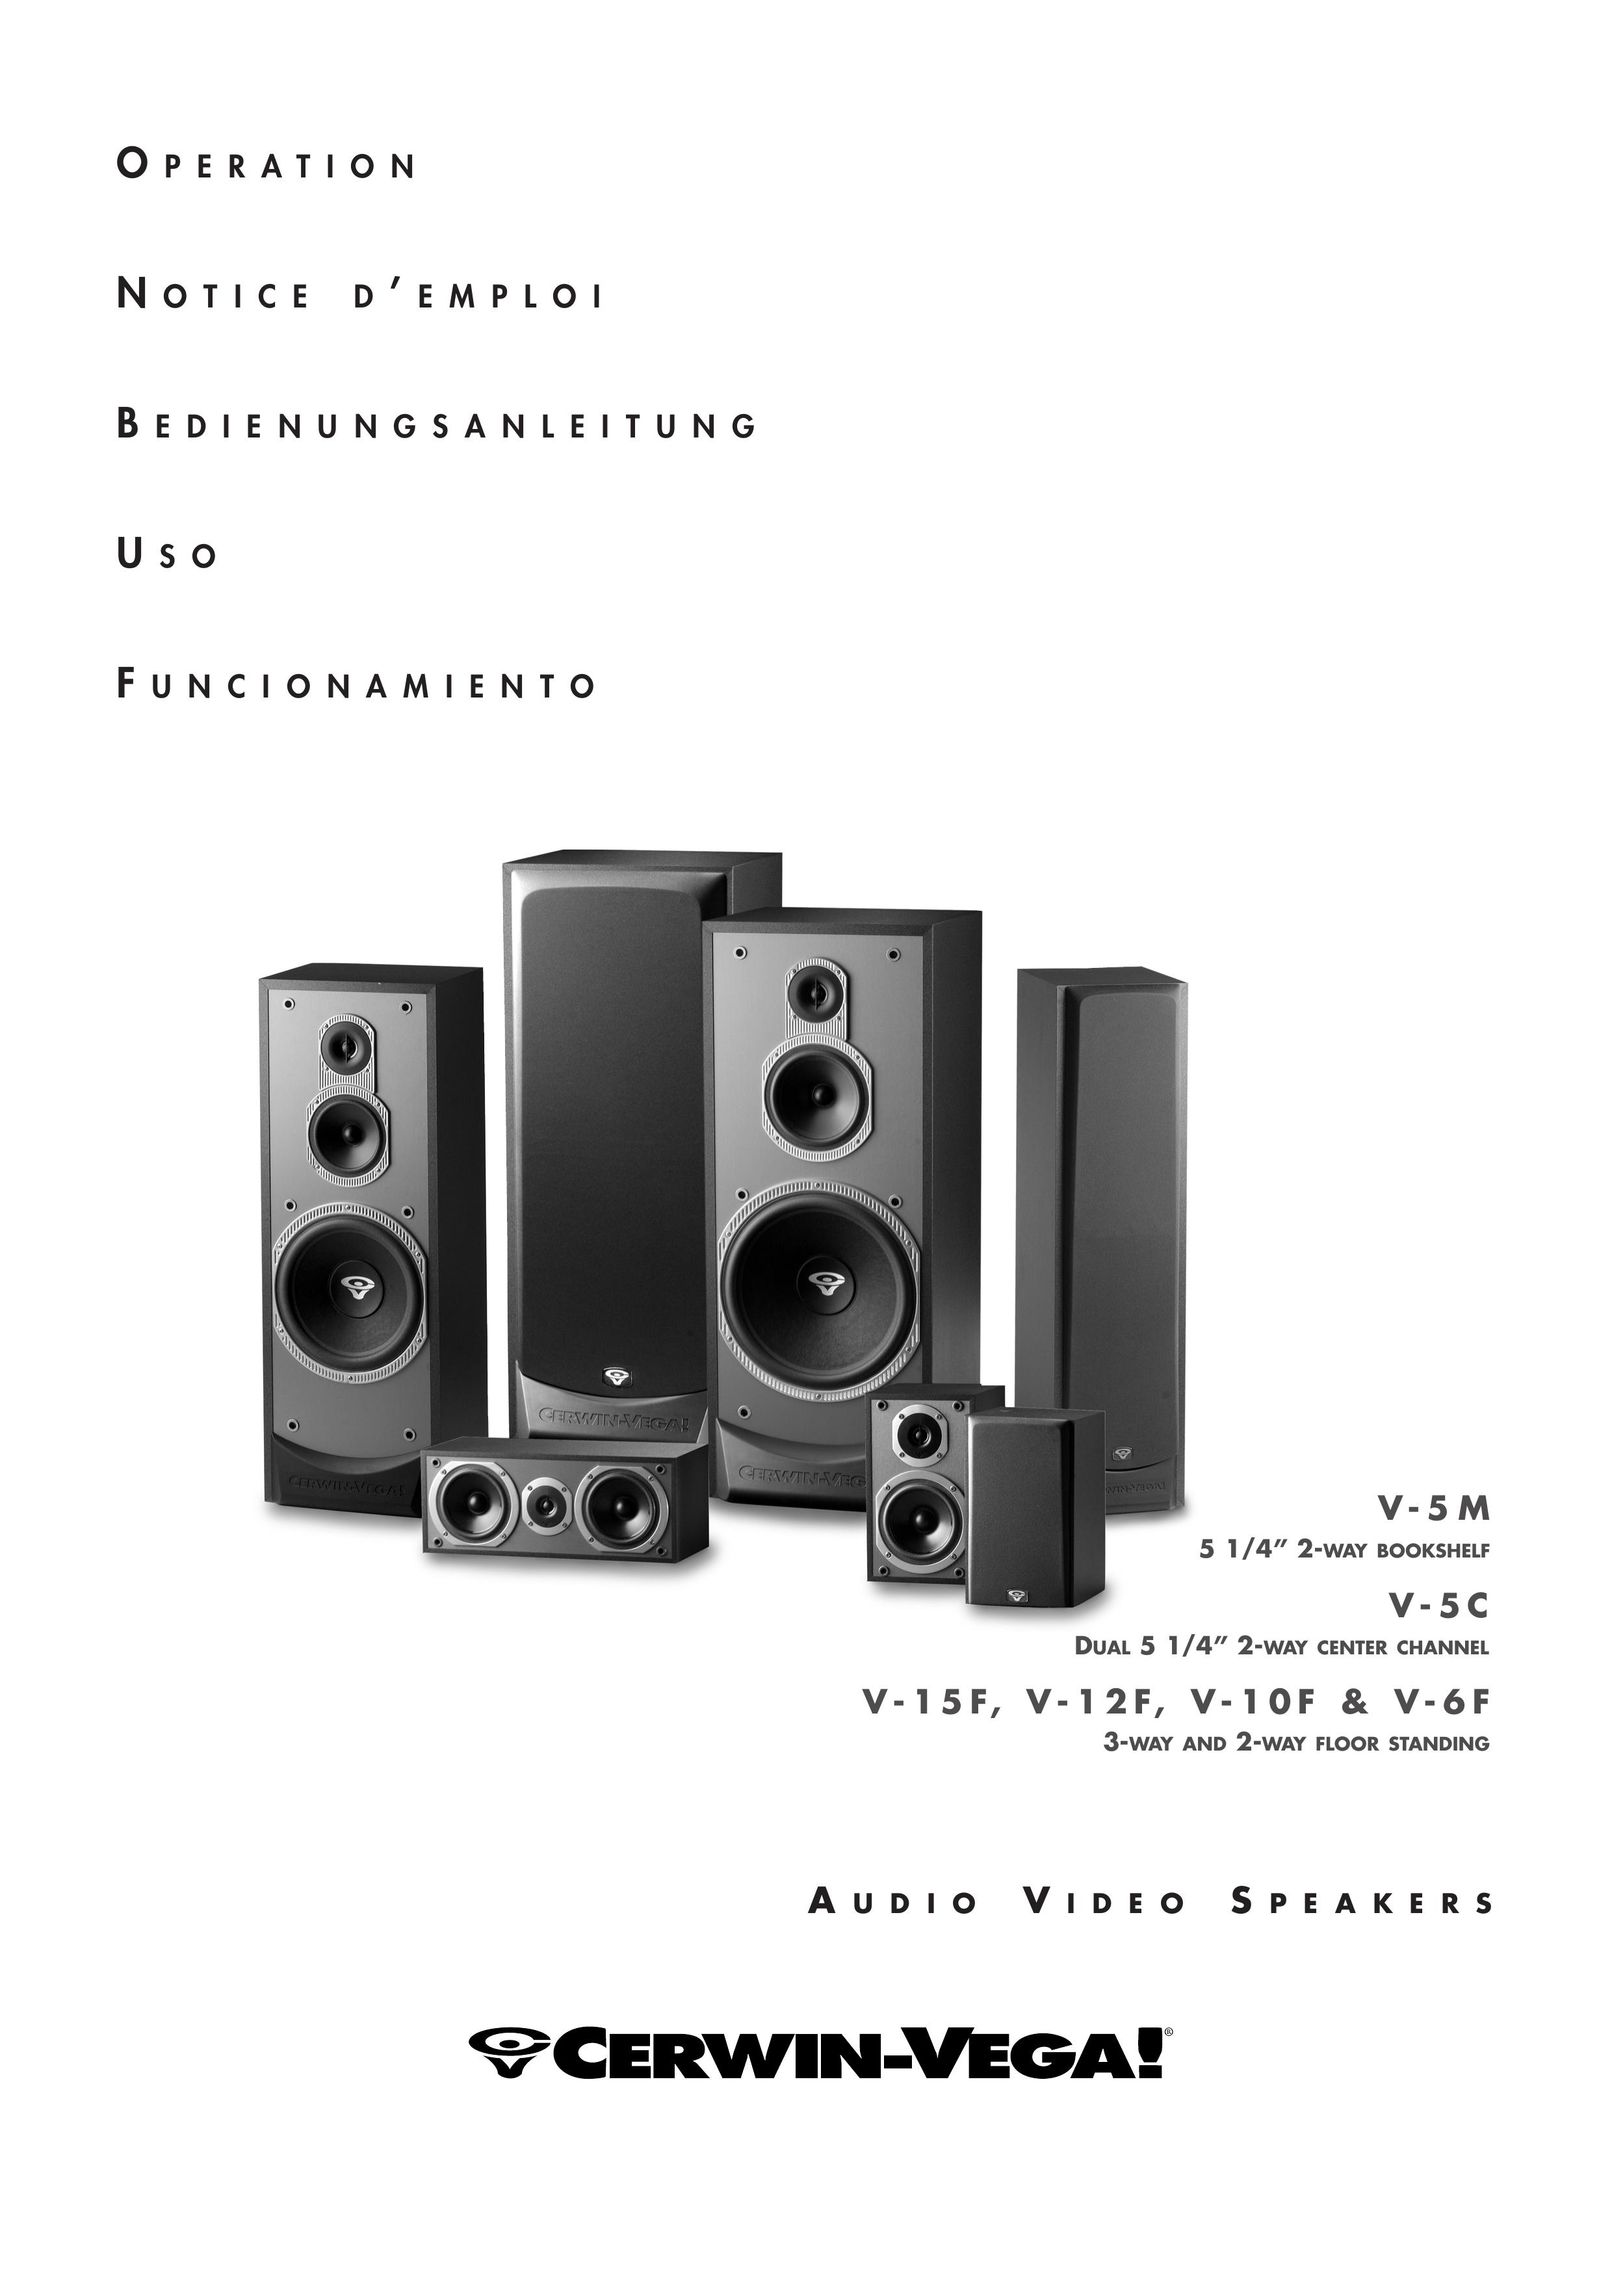 Cerwin-Vega V - 1 0 F Home Theater System User Manual (Page 1)